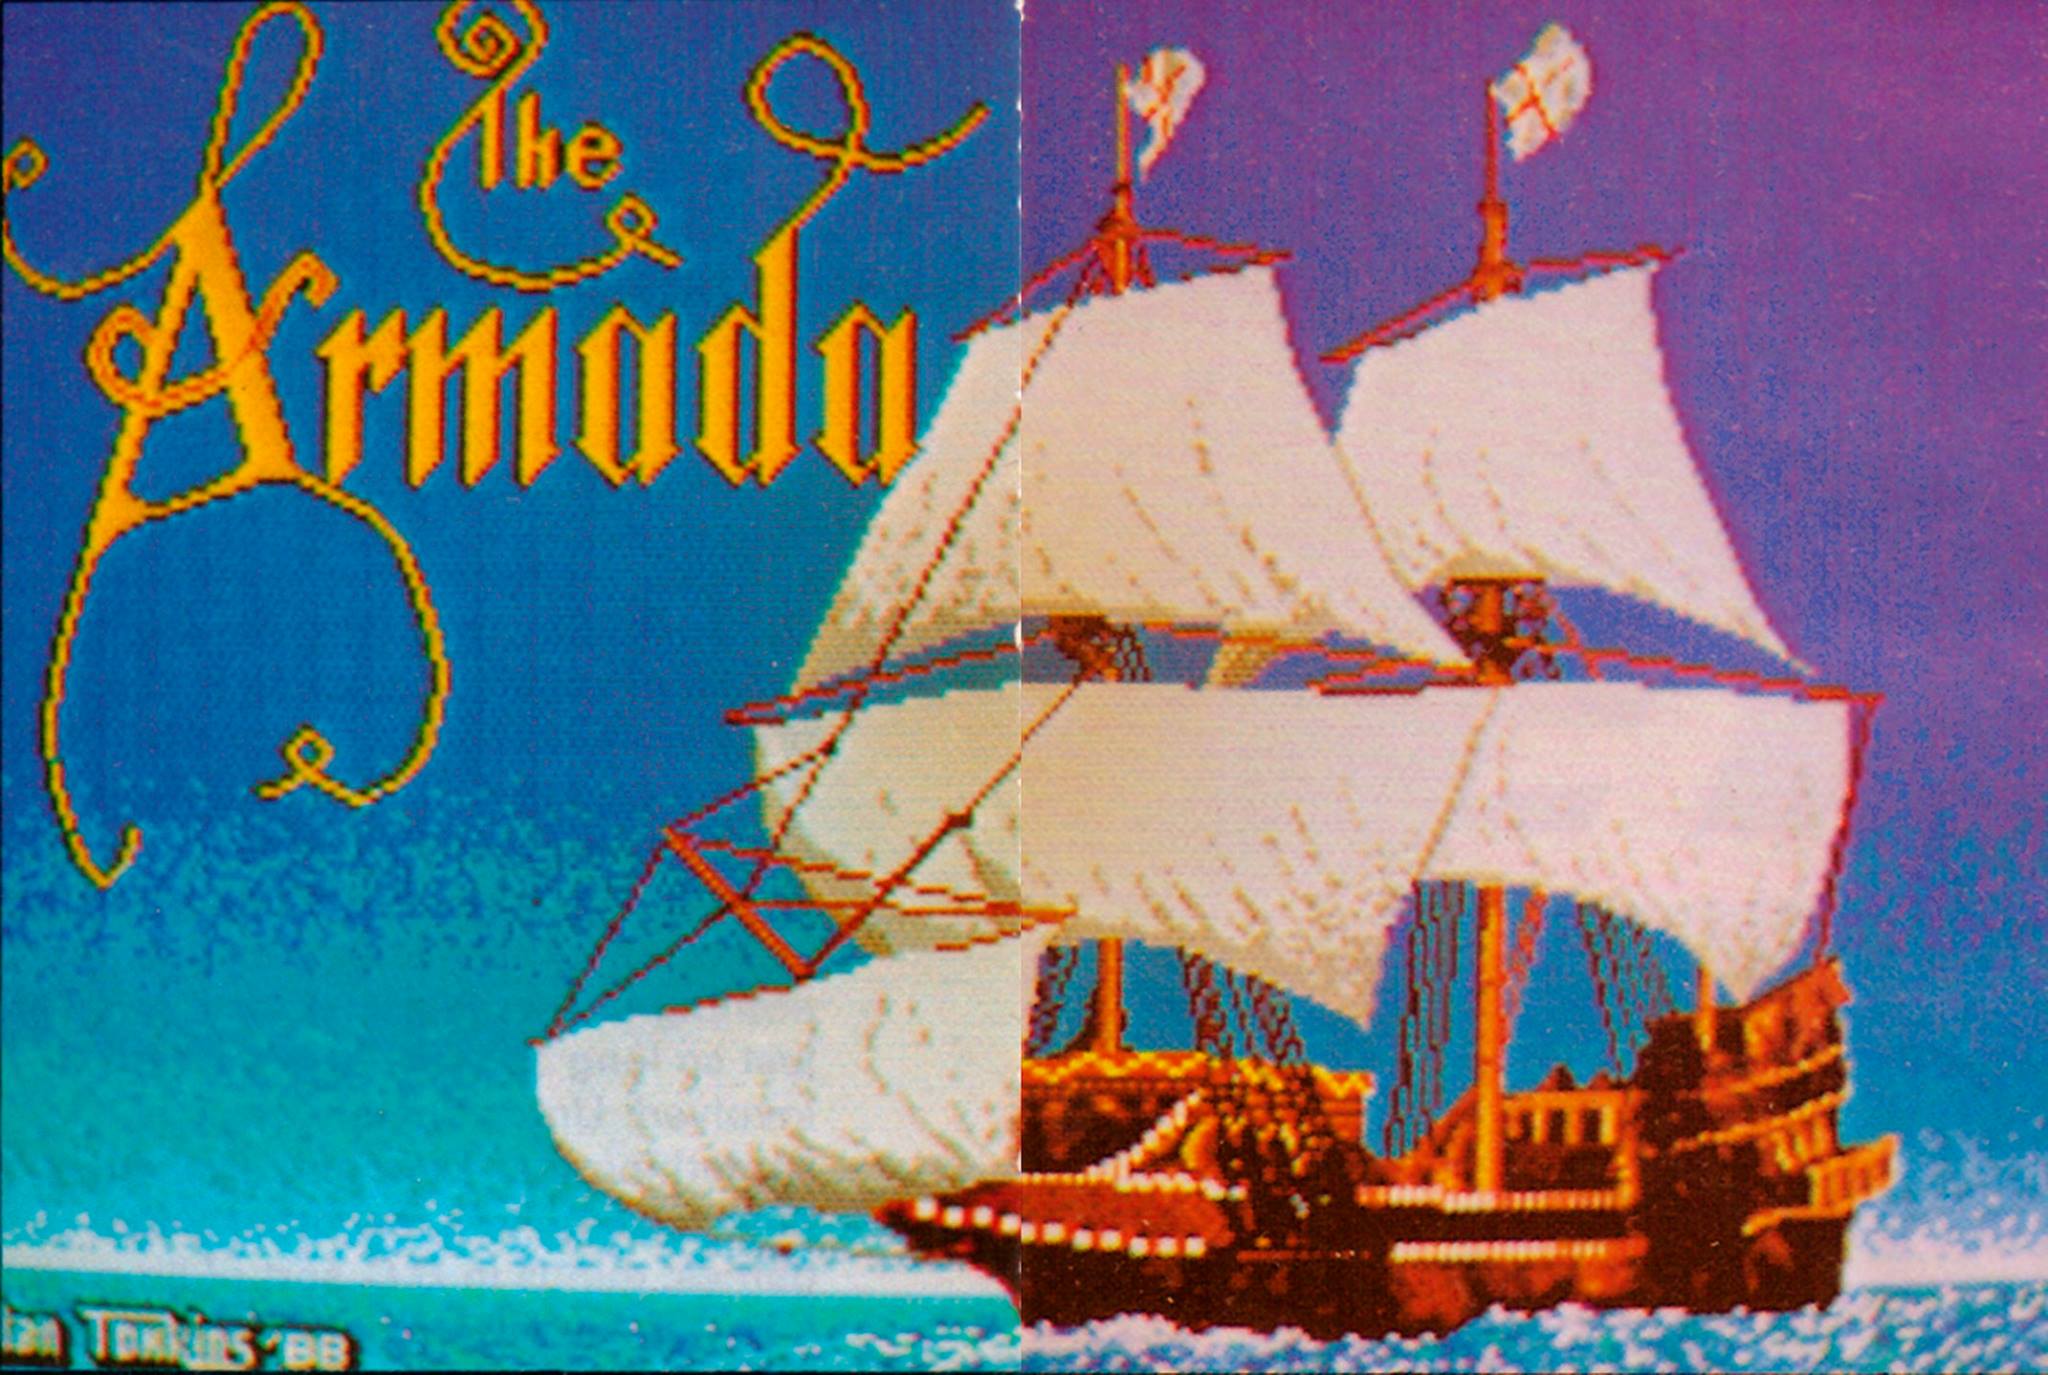 Armada was another unreleased game Alan worked on during the 80s